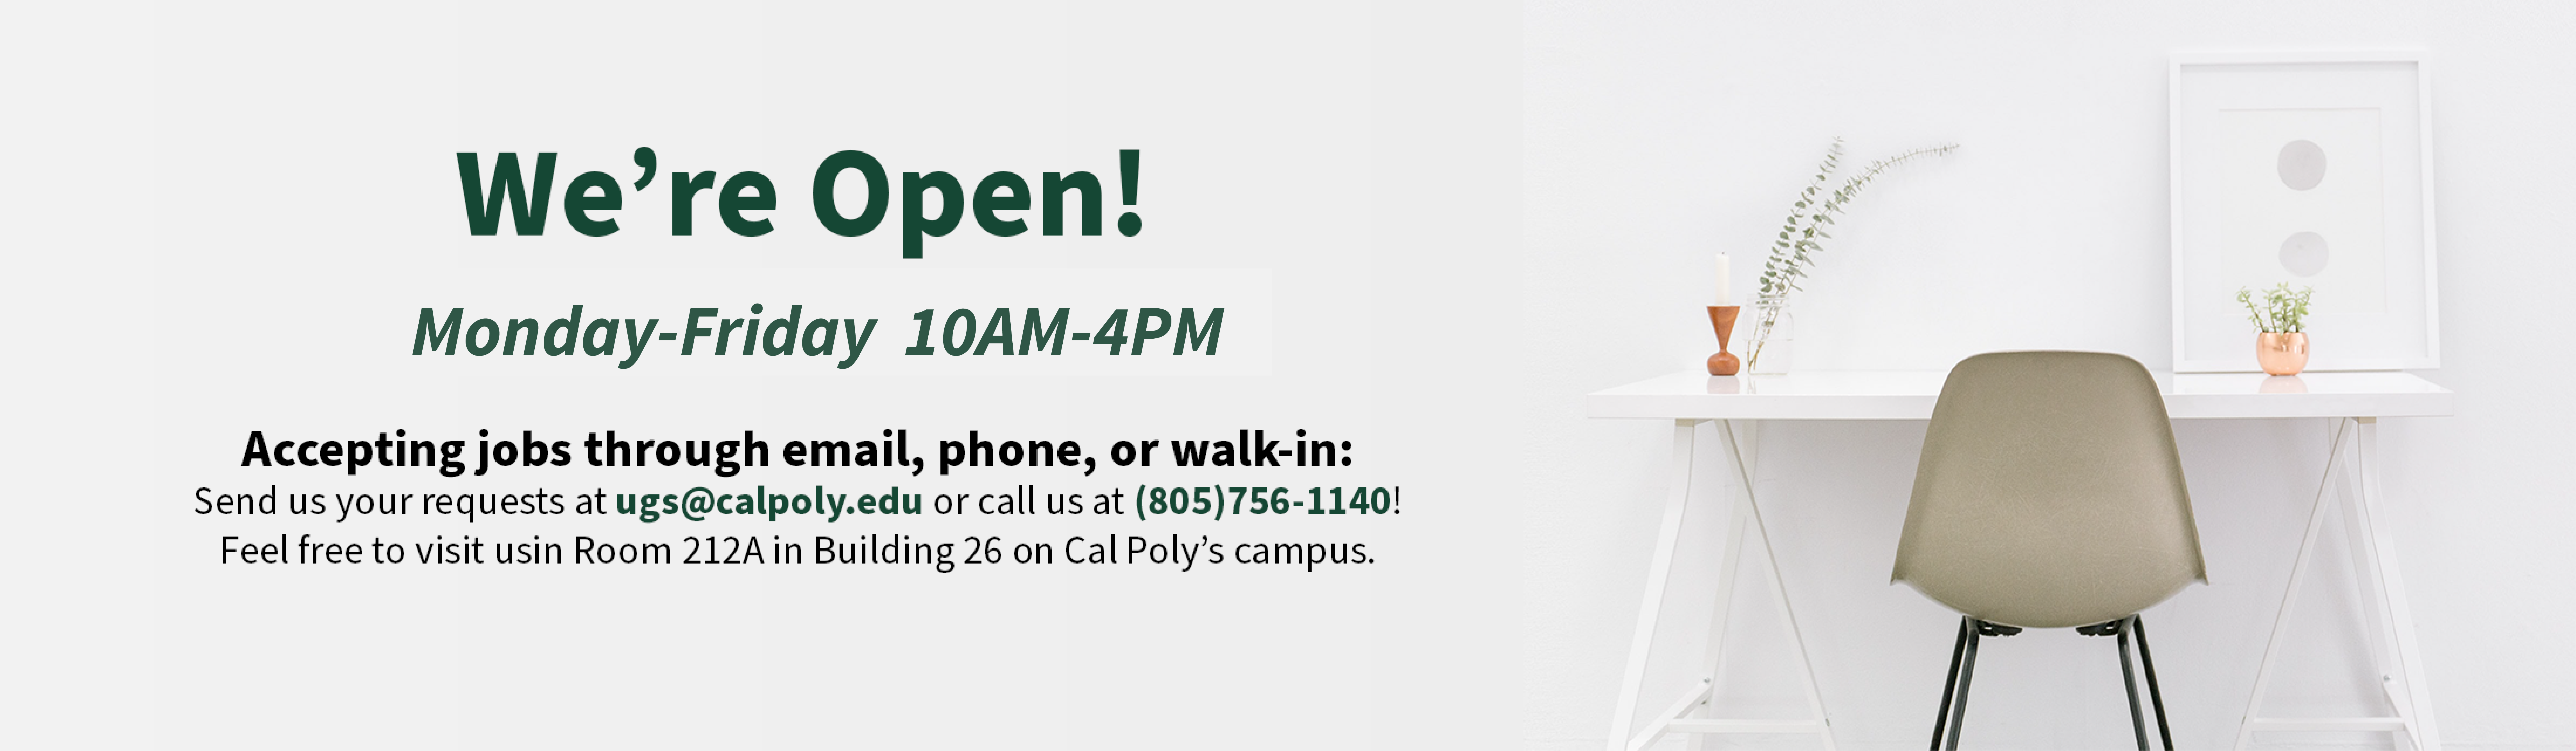 Digital design and marketing services are still available! If you're interested, email us at ugssales@calpoly.edu